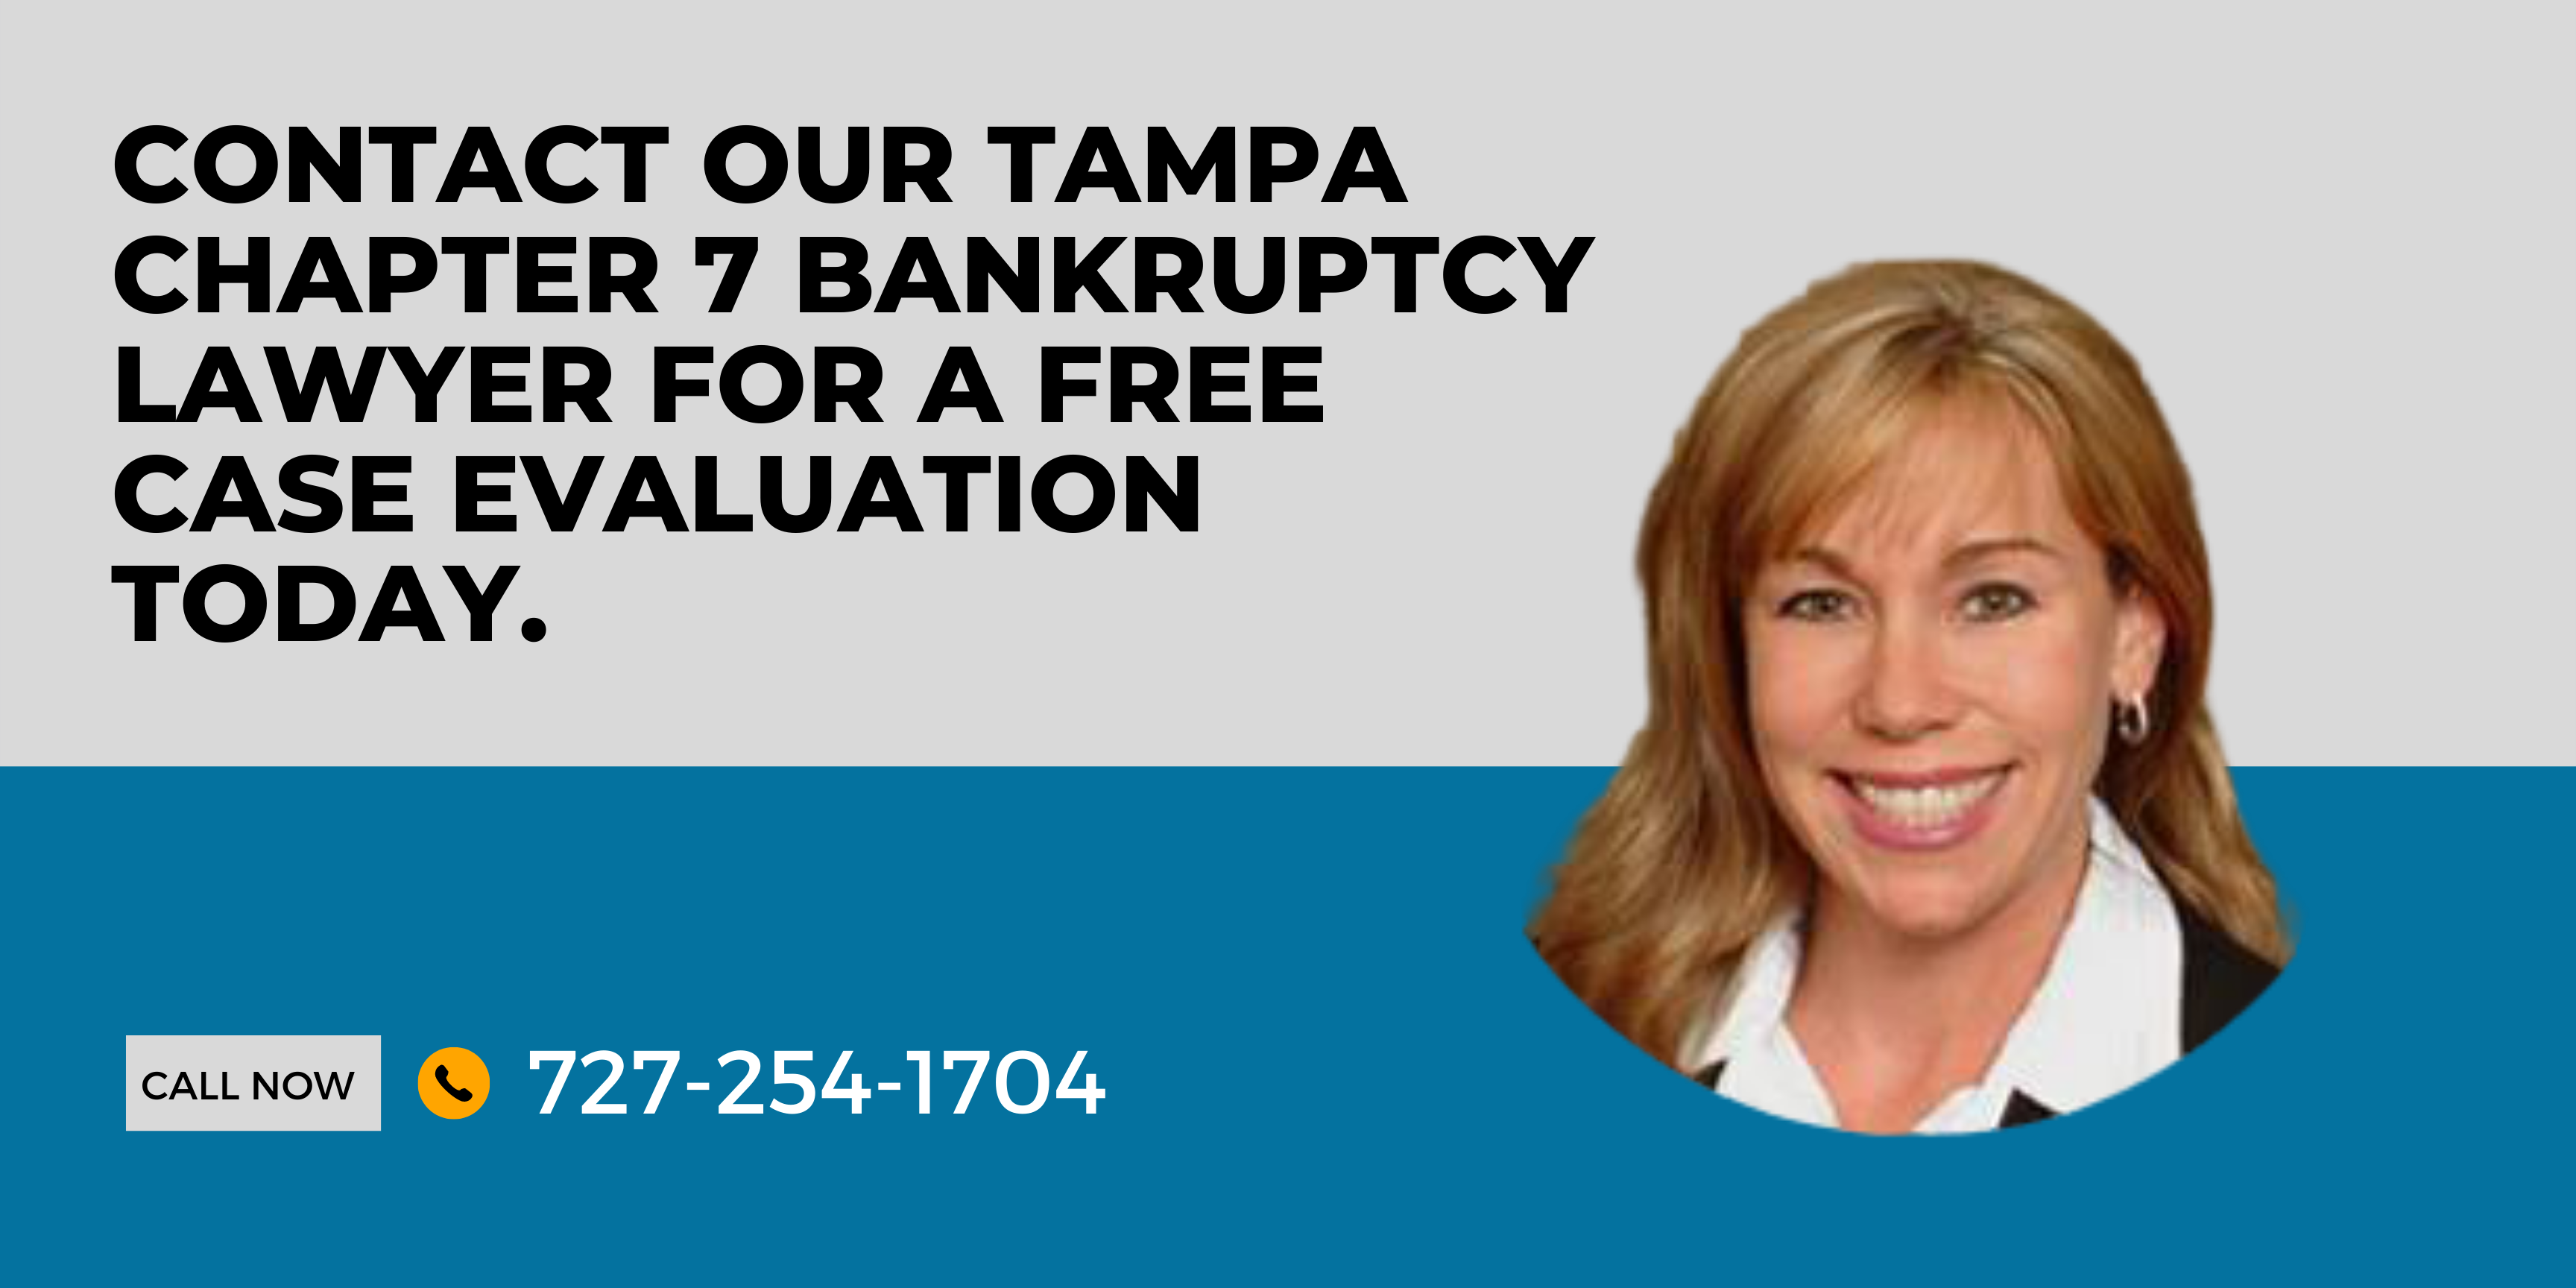 Contact our Tampa Chapter 7 Bankruptcy Lawyer